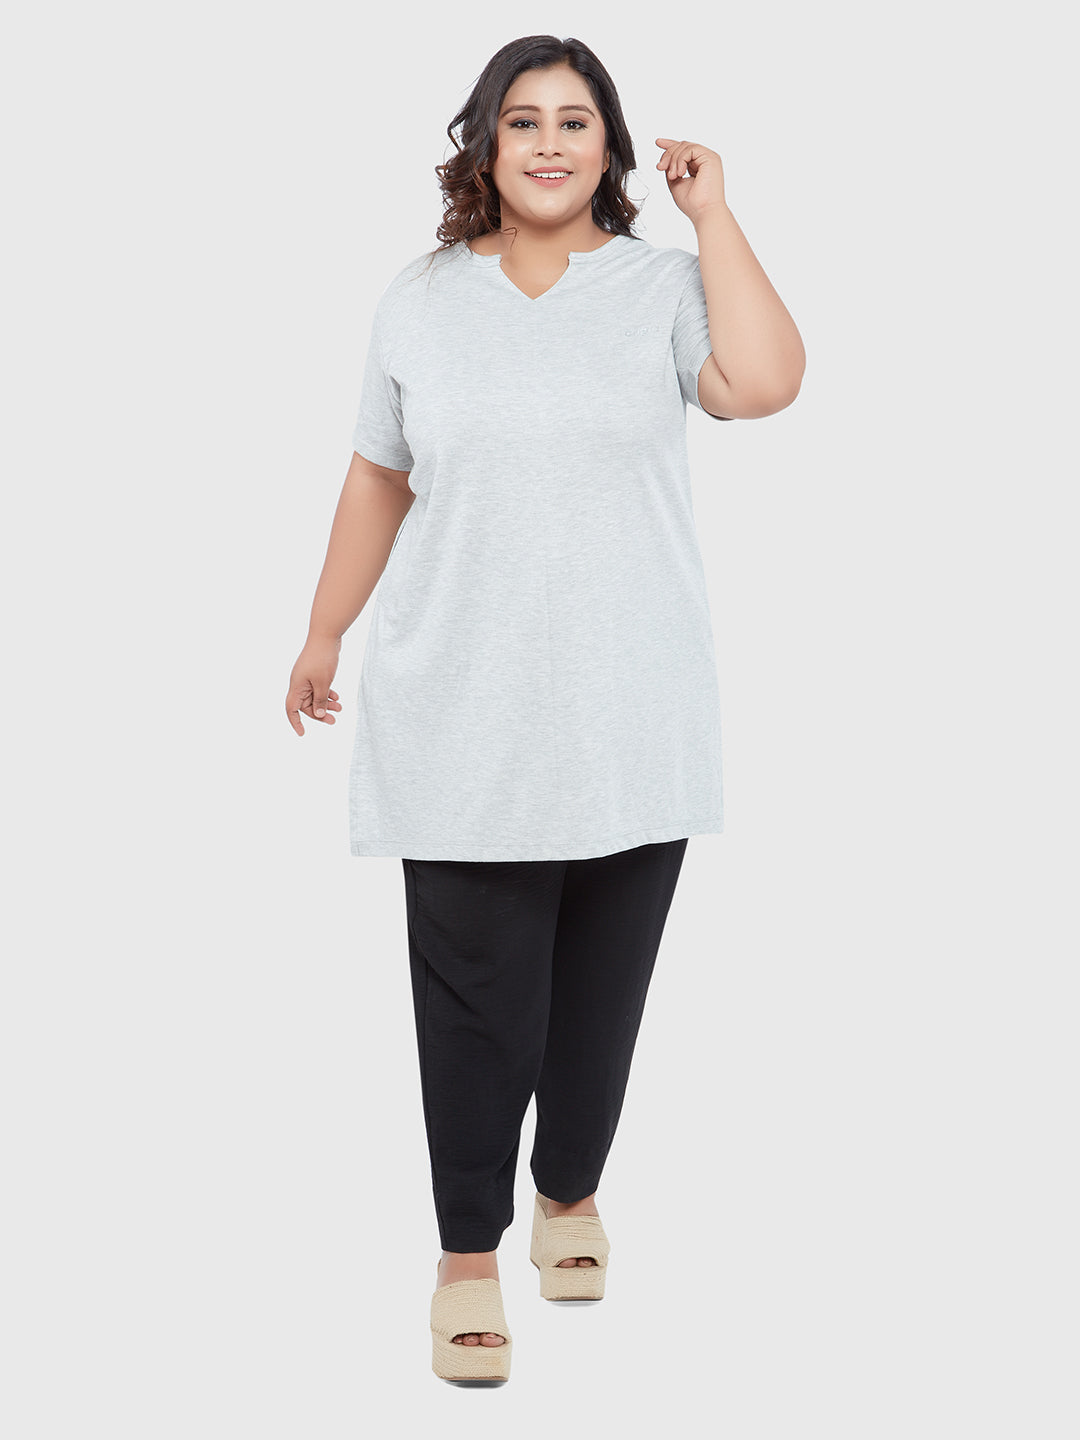 Plus Size Half Sleeves Grey Long Tops For Women